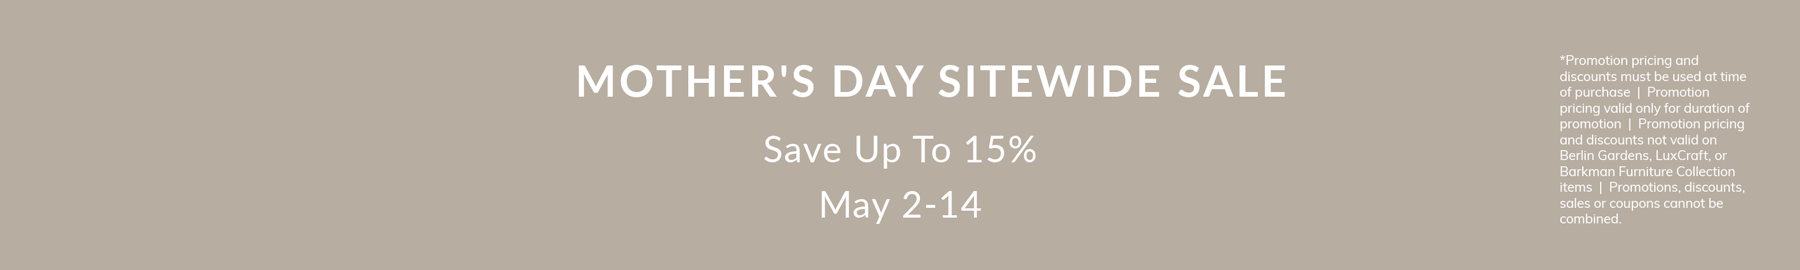 Mother's Day Sitewide Sale